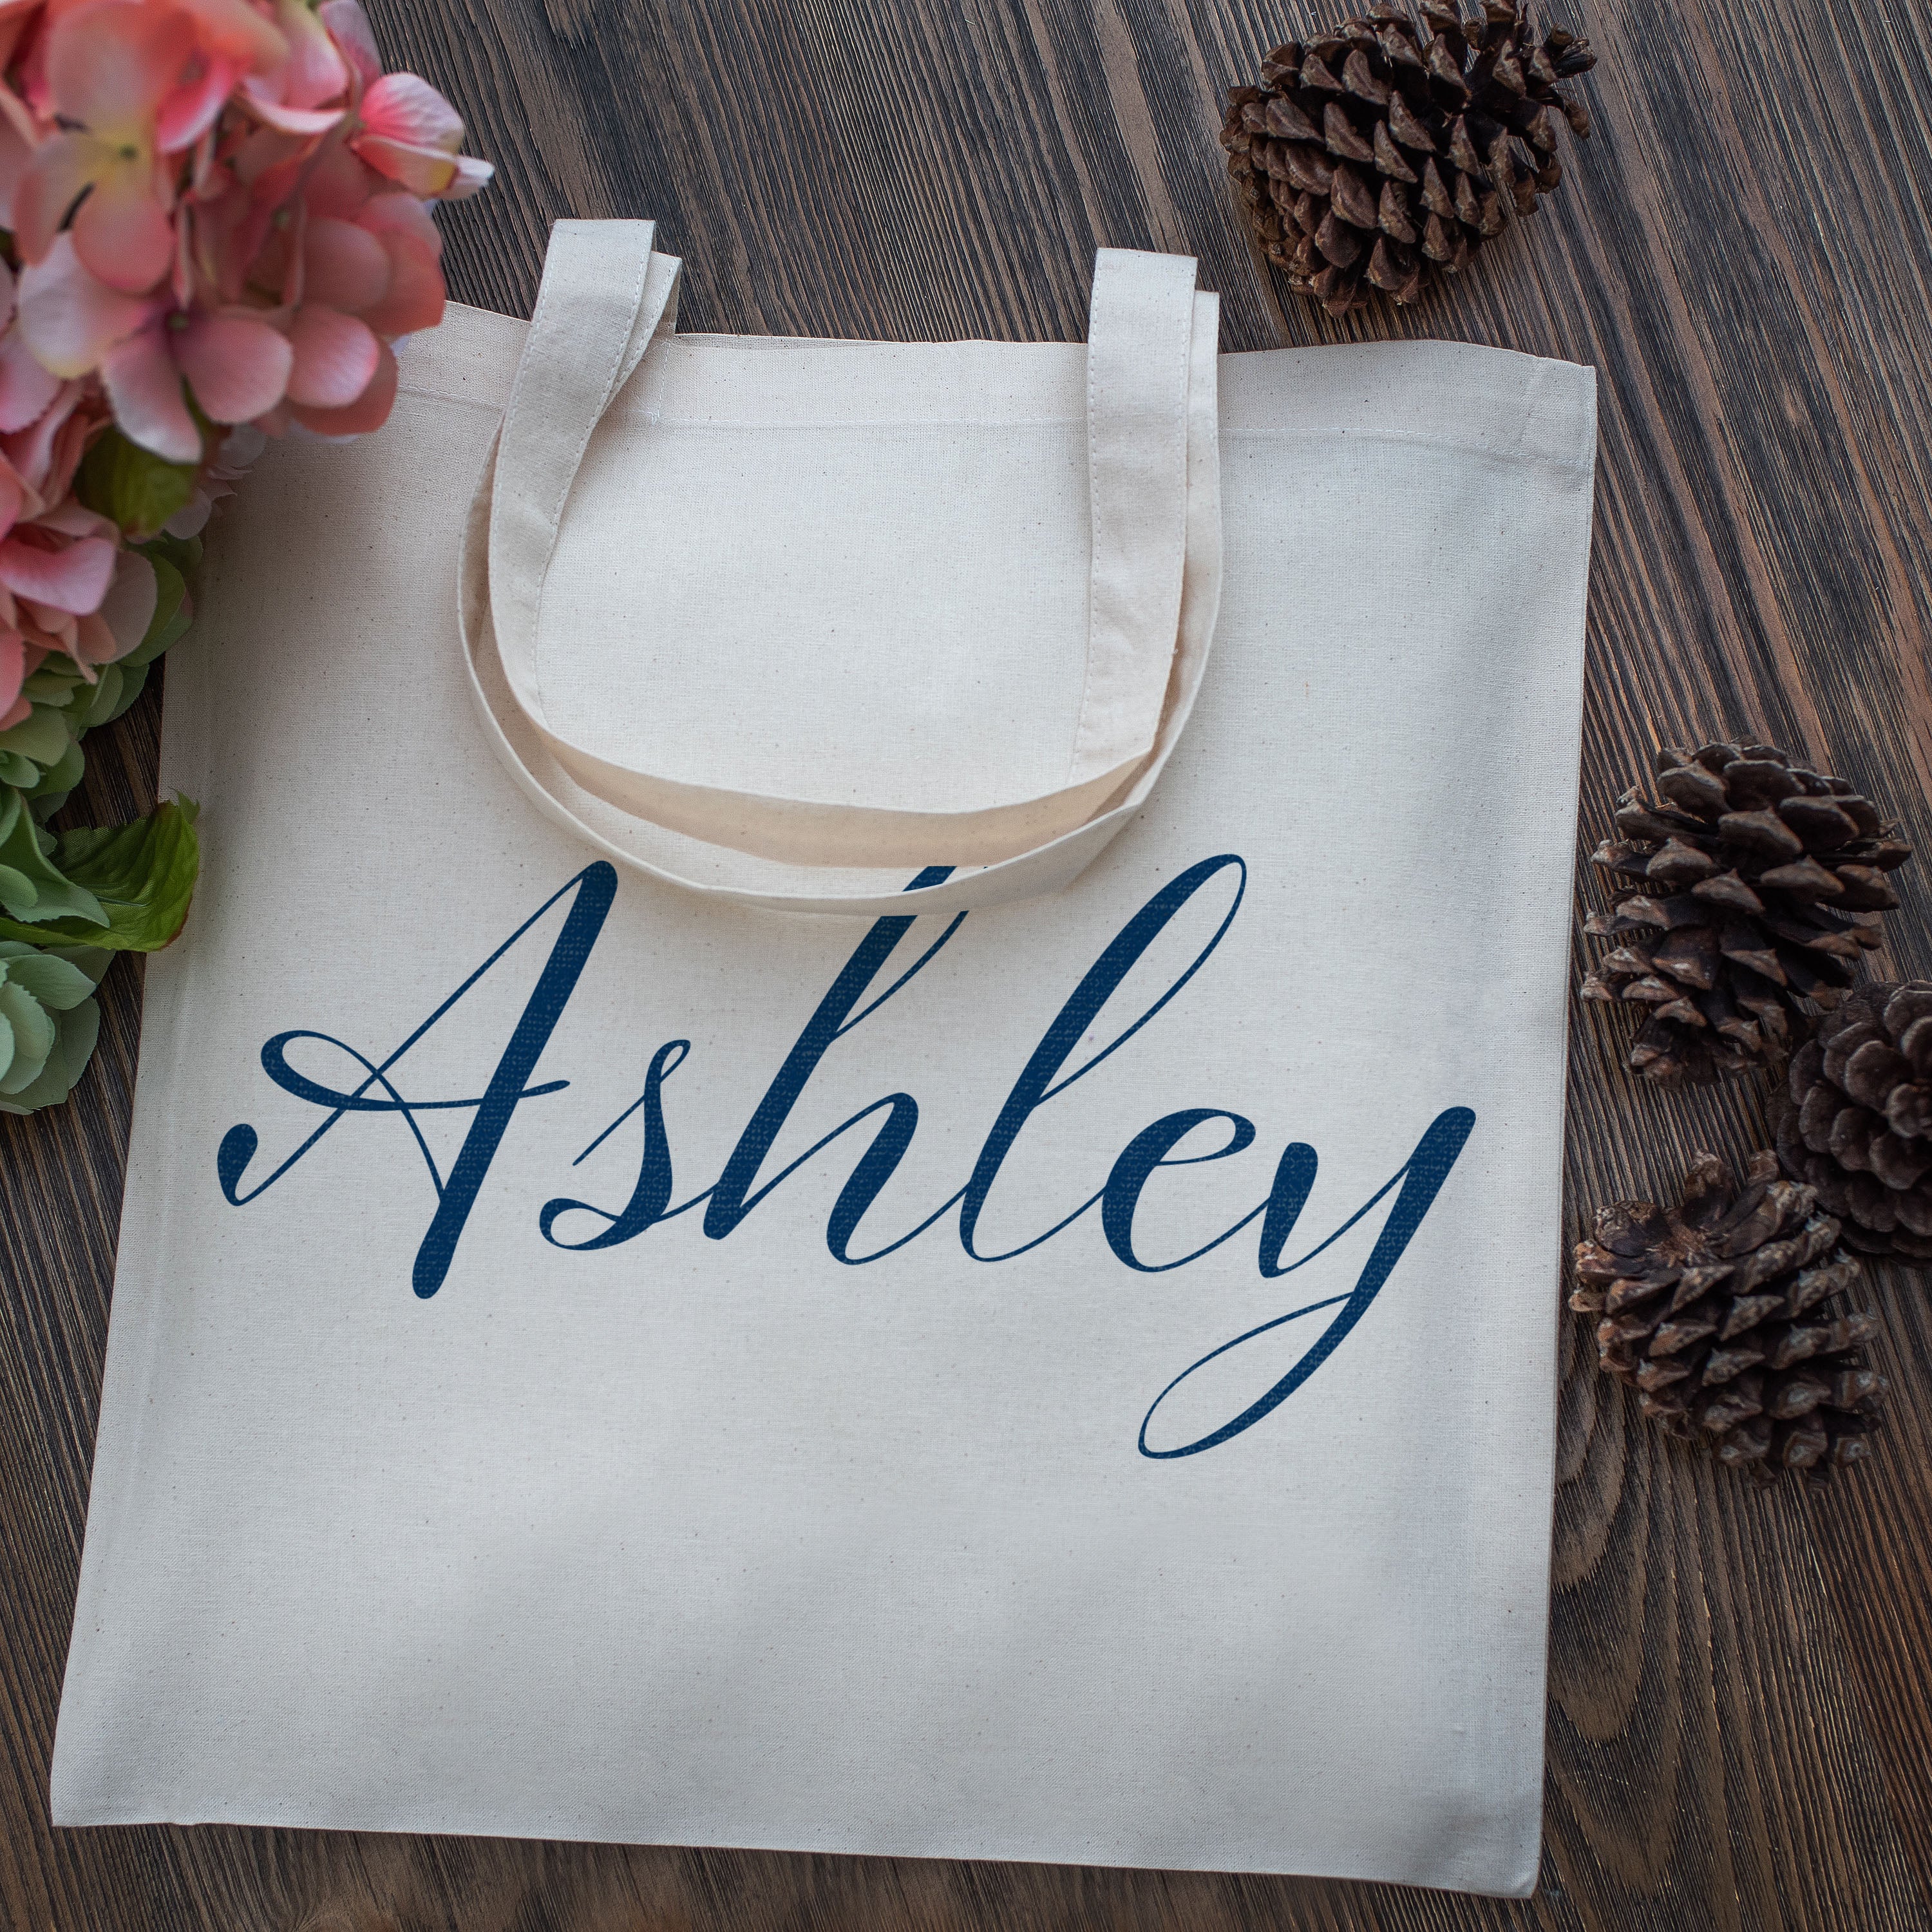 Buy Customized Tote bags With Names